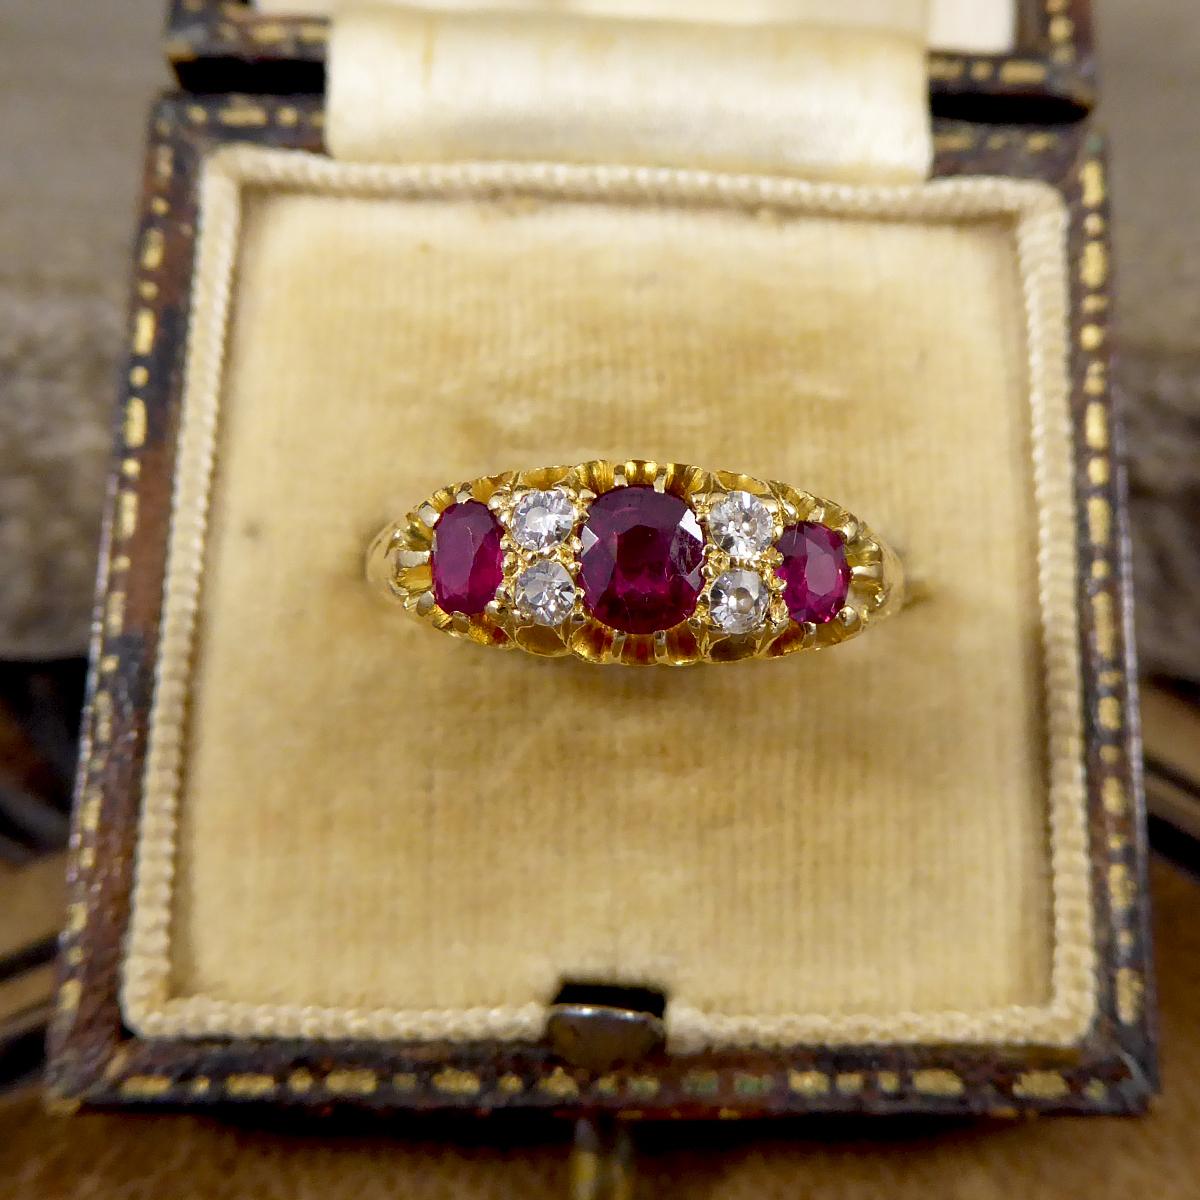 Edwardian Vibrant Colored Ruby and Diamond Ring in 18 Carat Yellow Gold 3